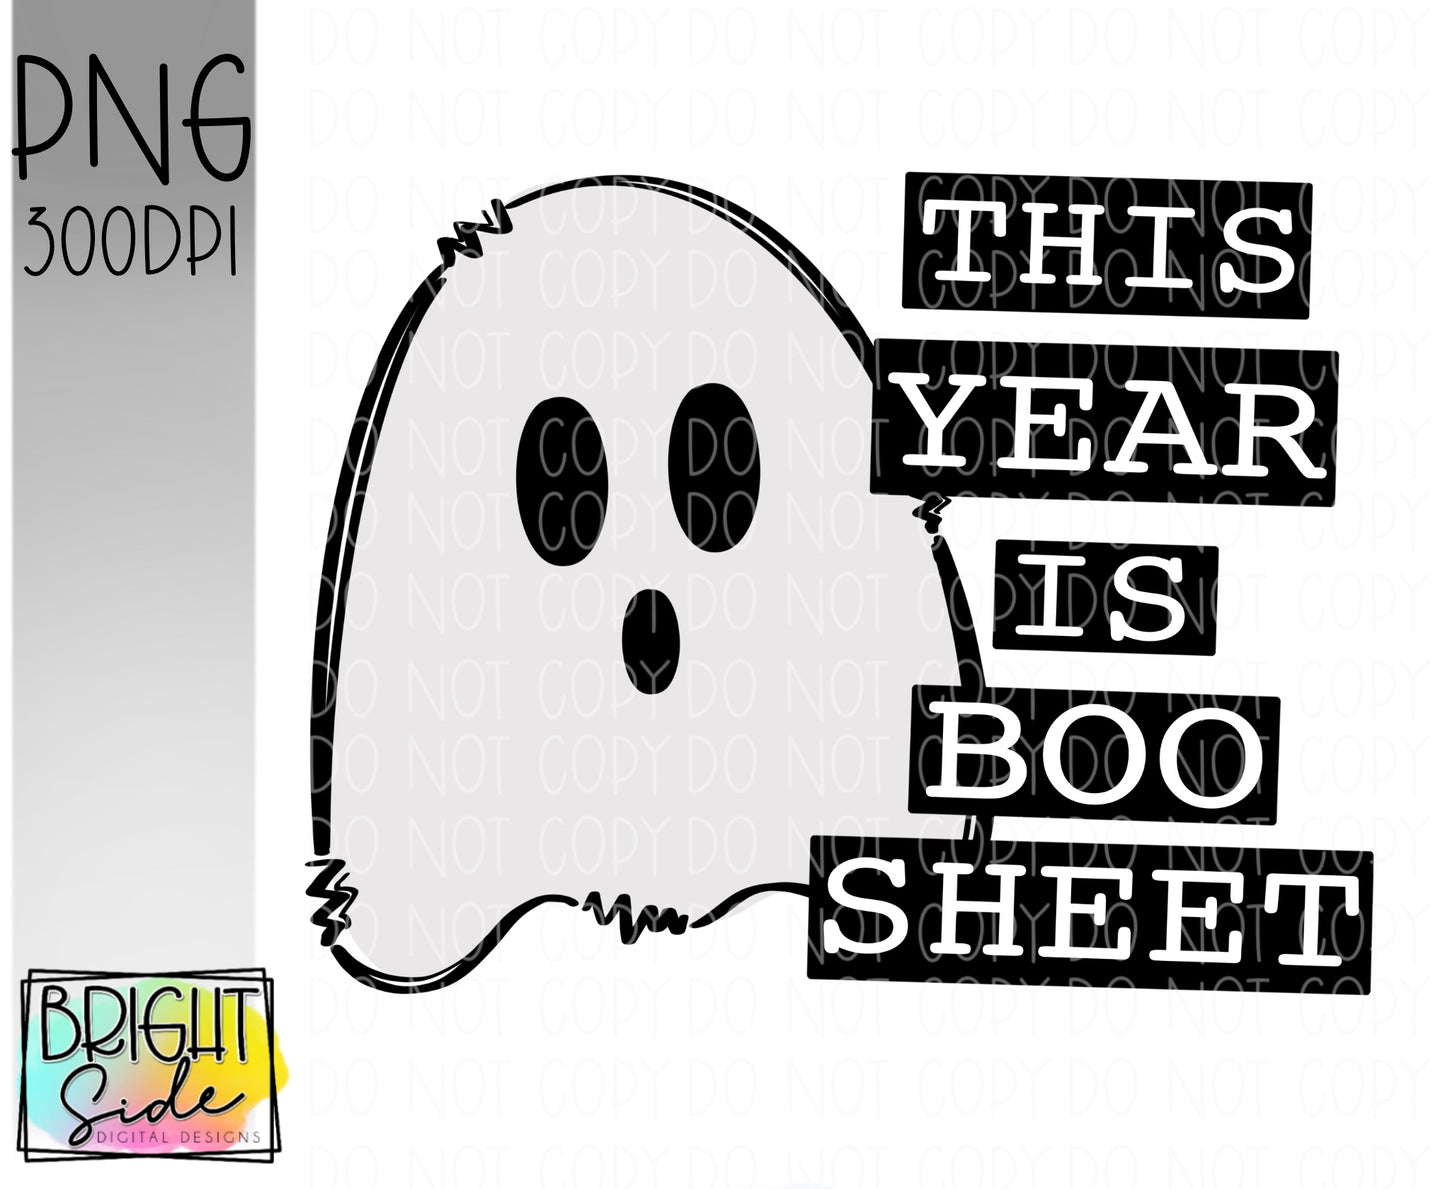 This year is boo sheet